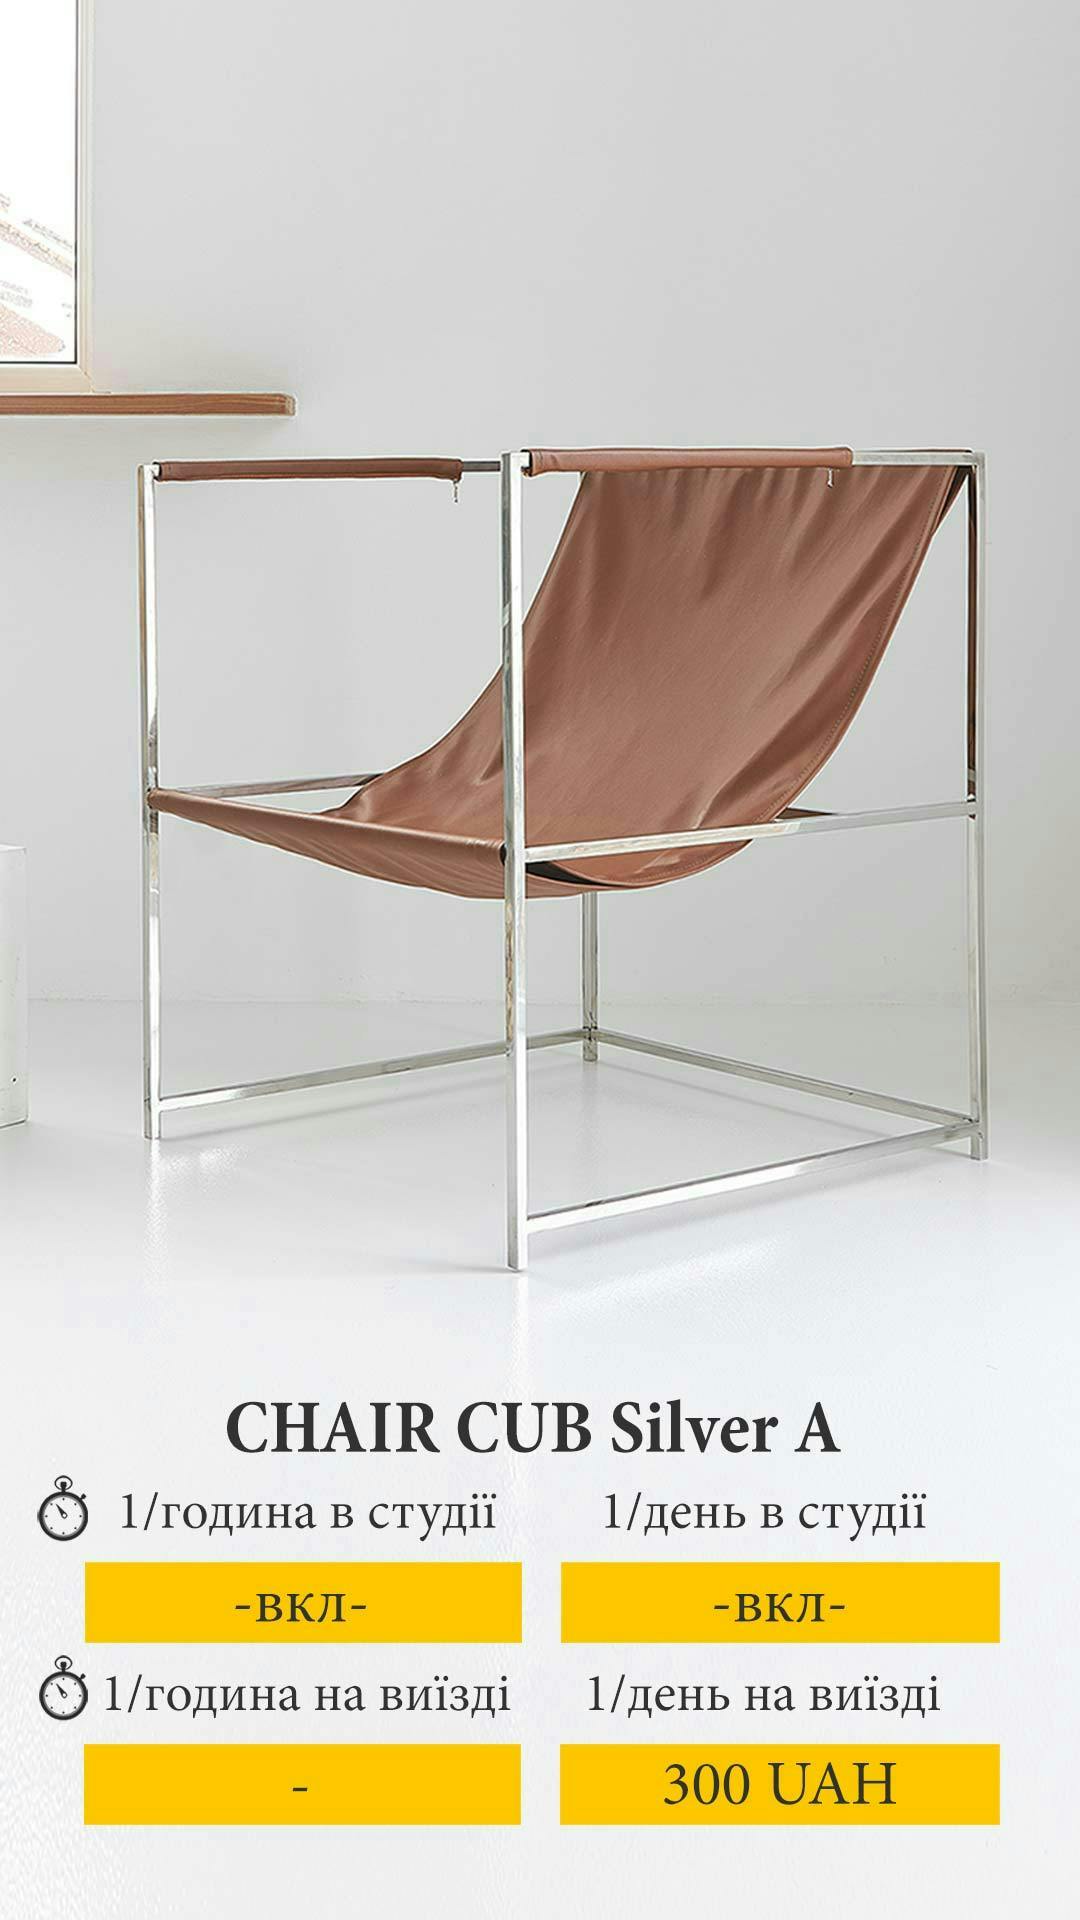 Cover image from chair_cub_silver_a